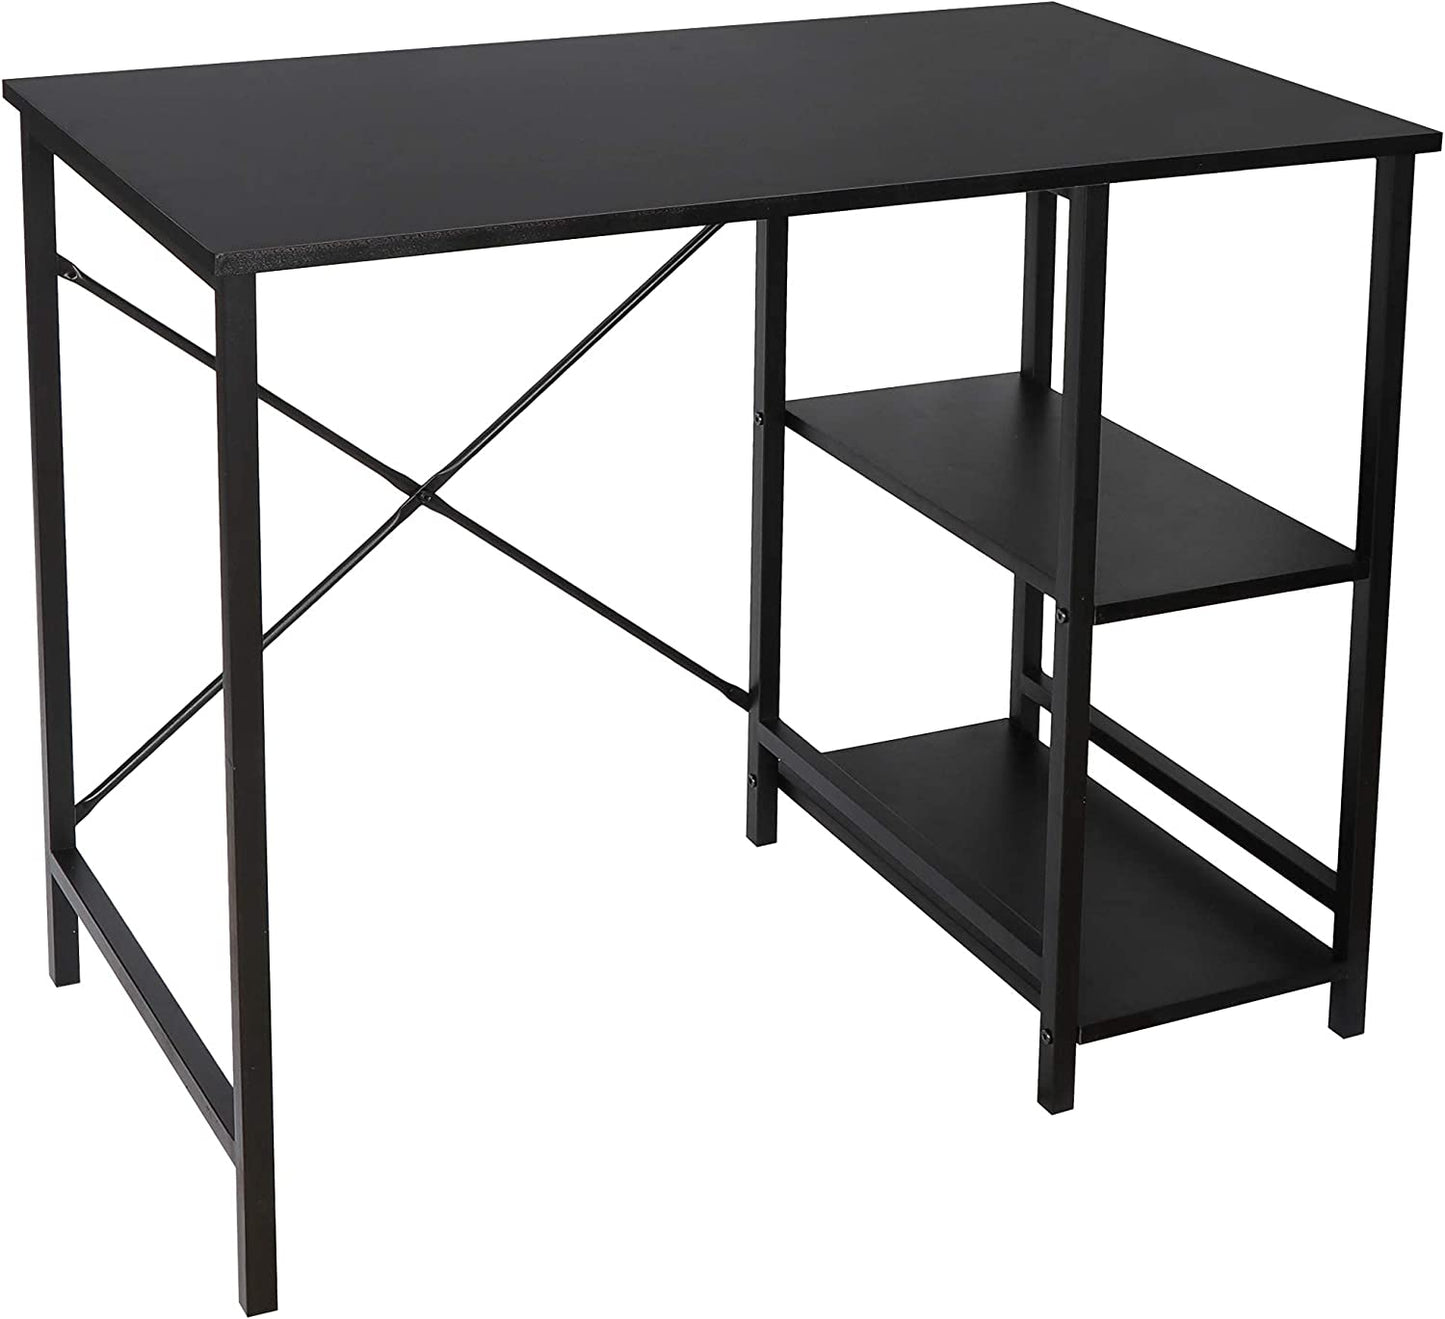 Small Computer Desk with Storage Shelves Sturdy Student Writing Desk Corner Computer Workstation Laptop PC Table Black